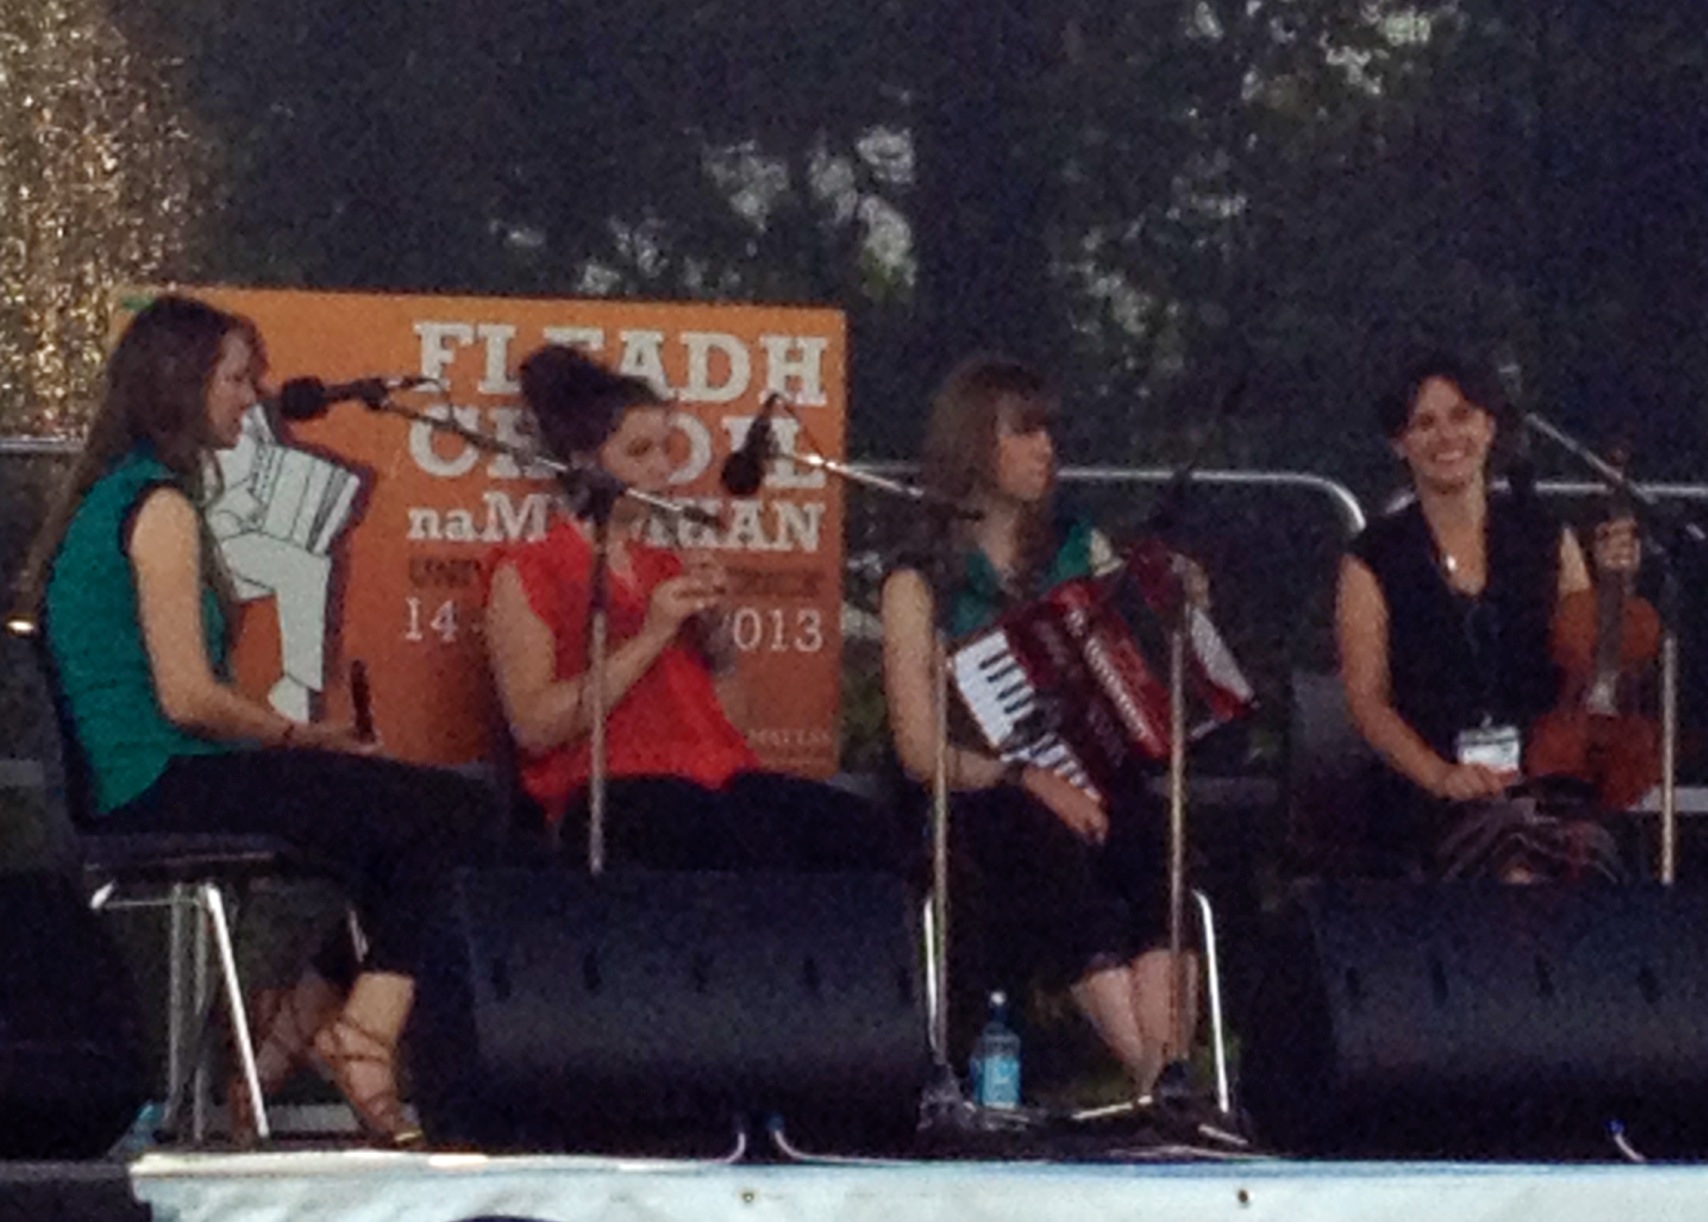 Ceol na Coille perform at The Munster Fleadh-Limerick 2013